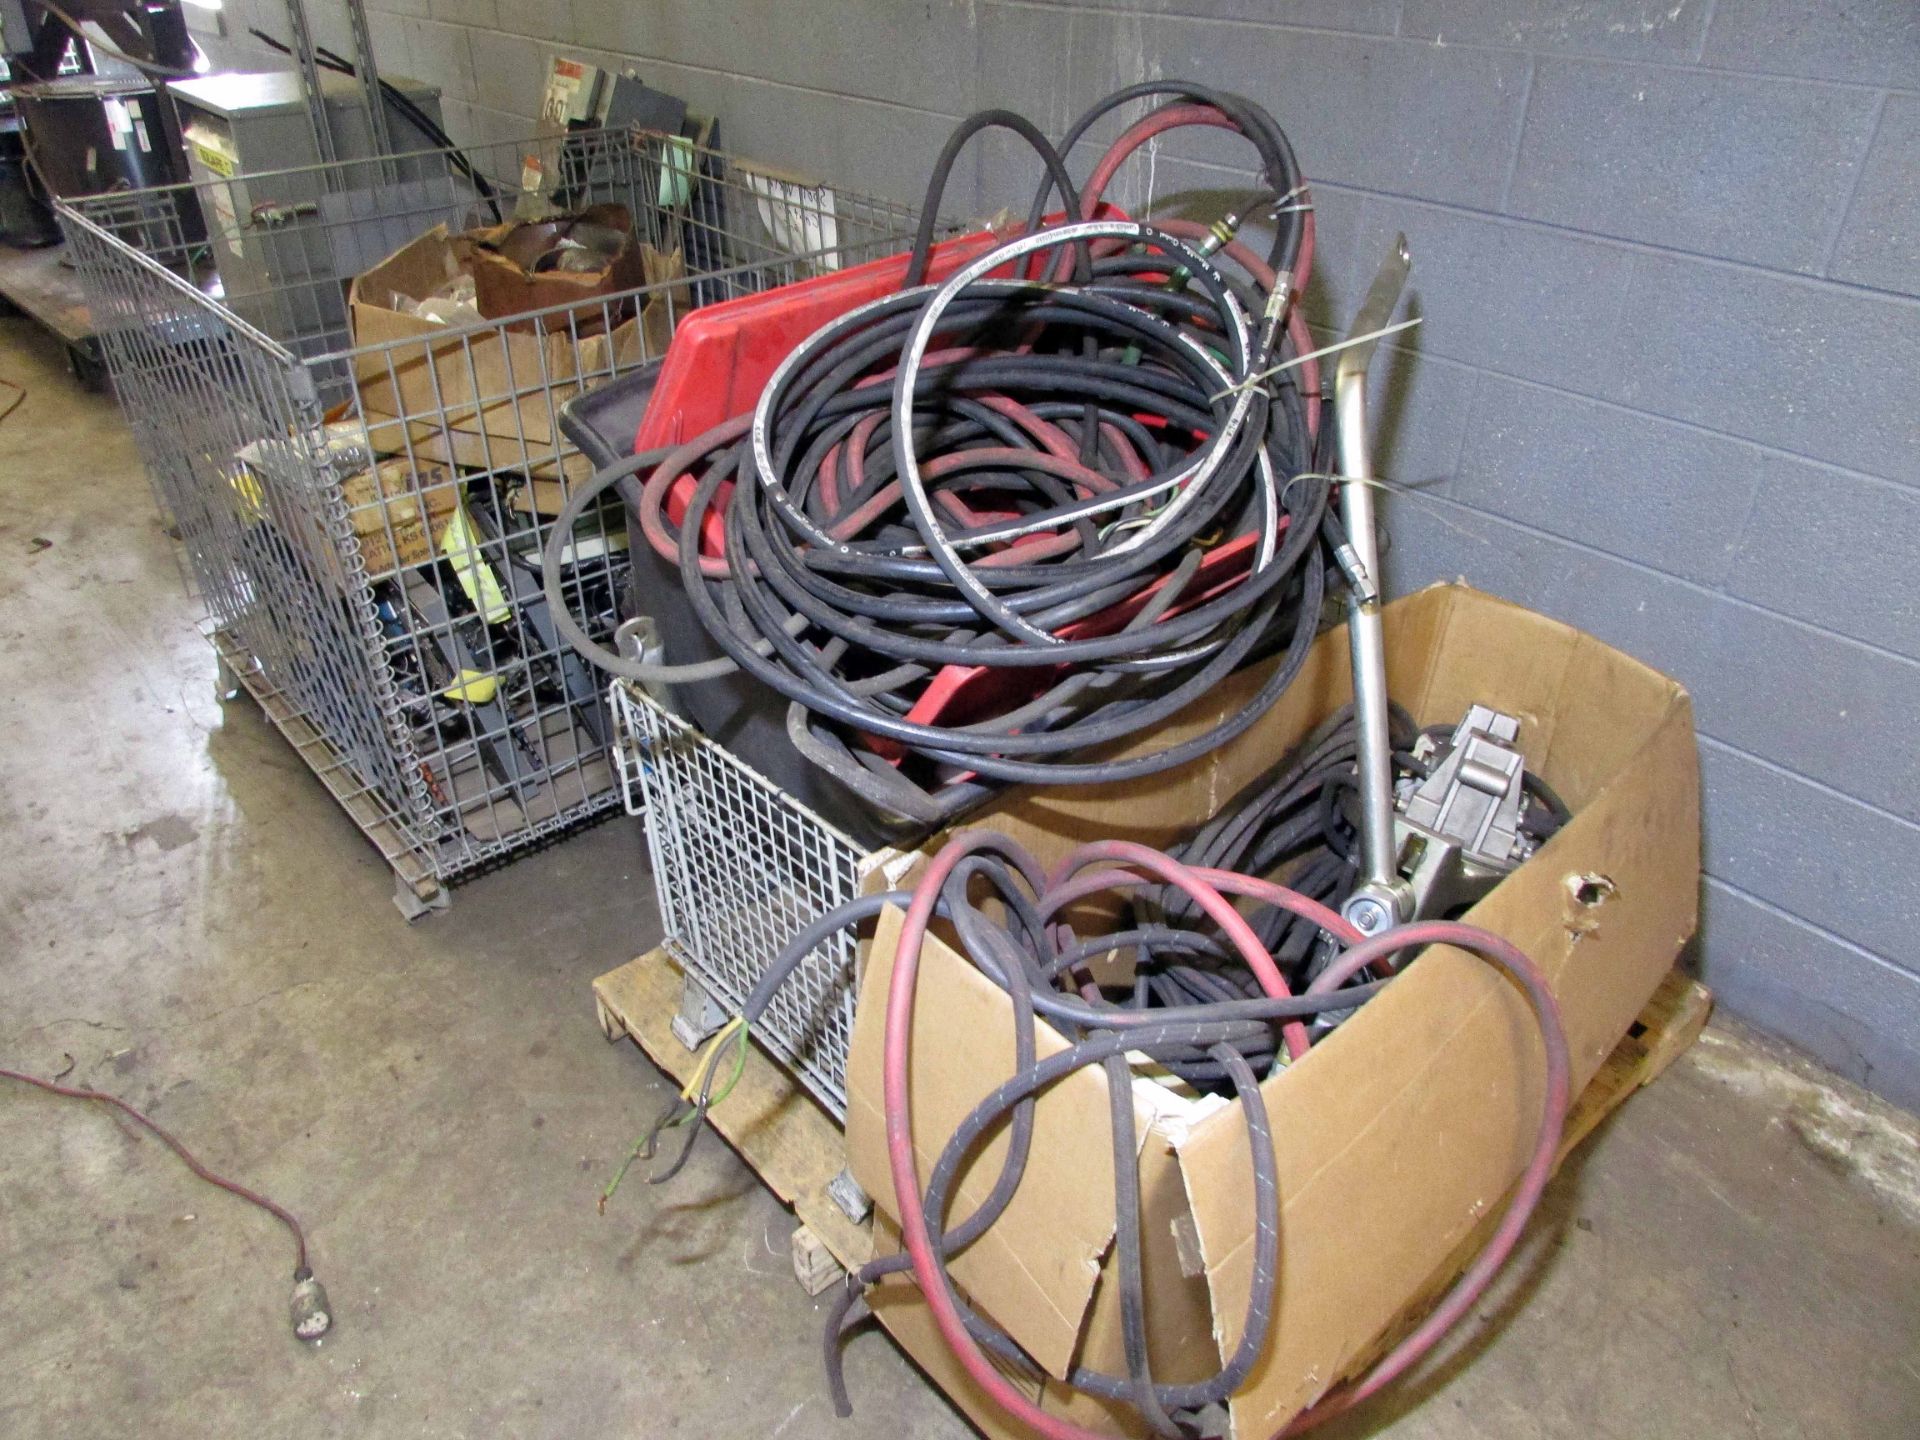 LOT OF ELECTRICAL SPARE PARTS: VFD drives, disconnect switches, transformers, etc., assorted - Image 7 of 7